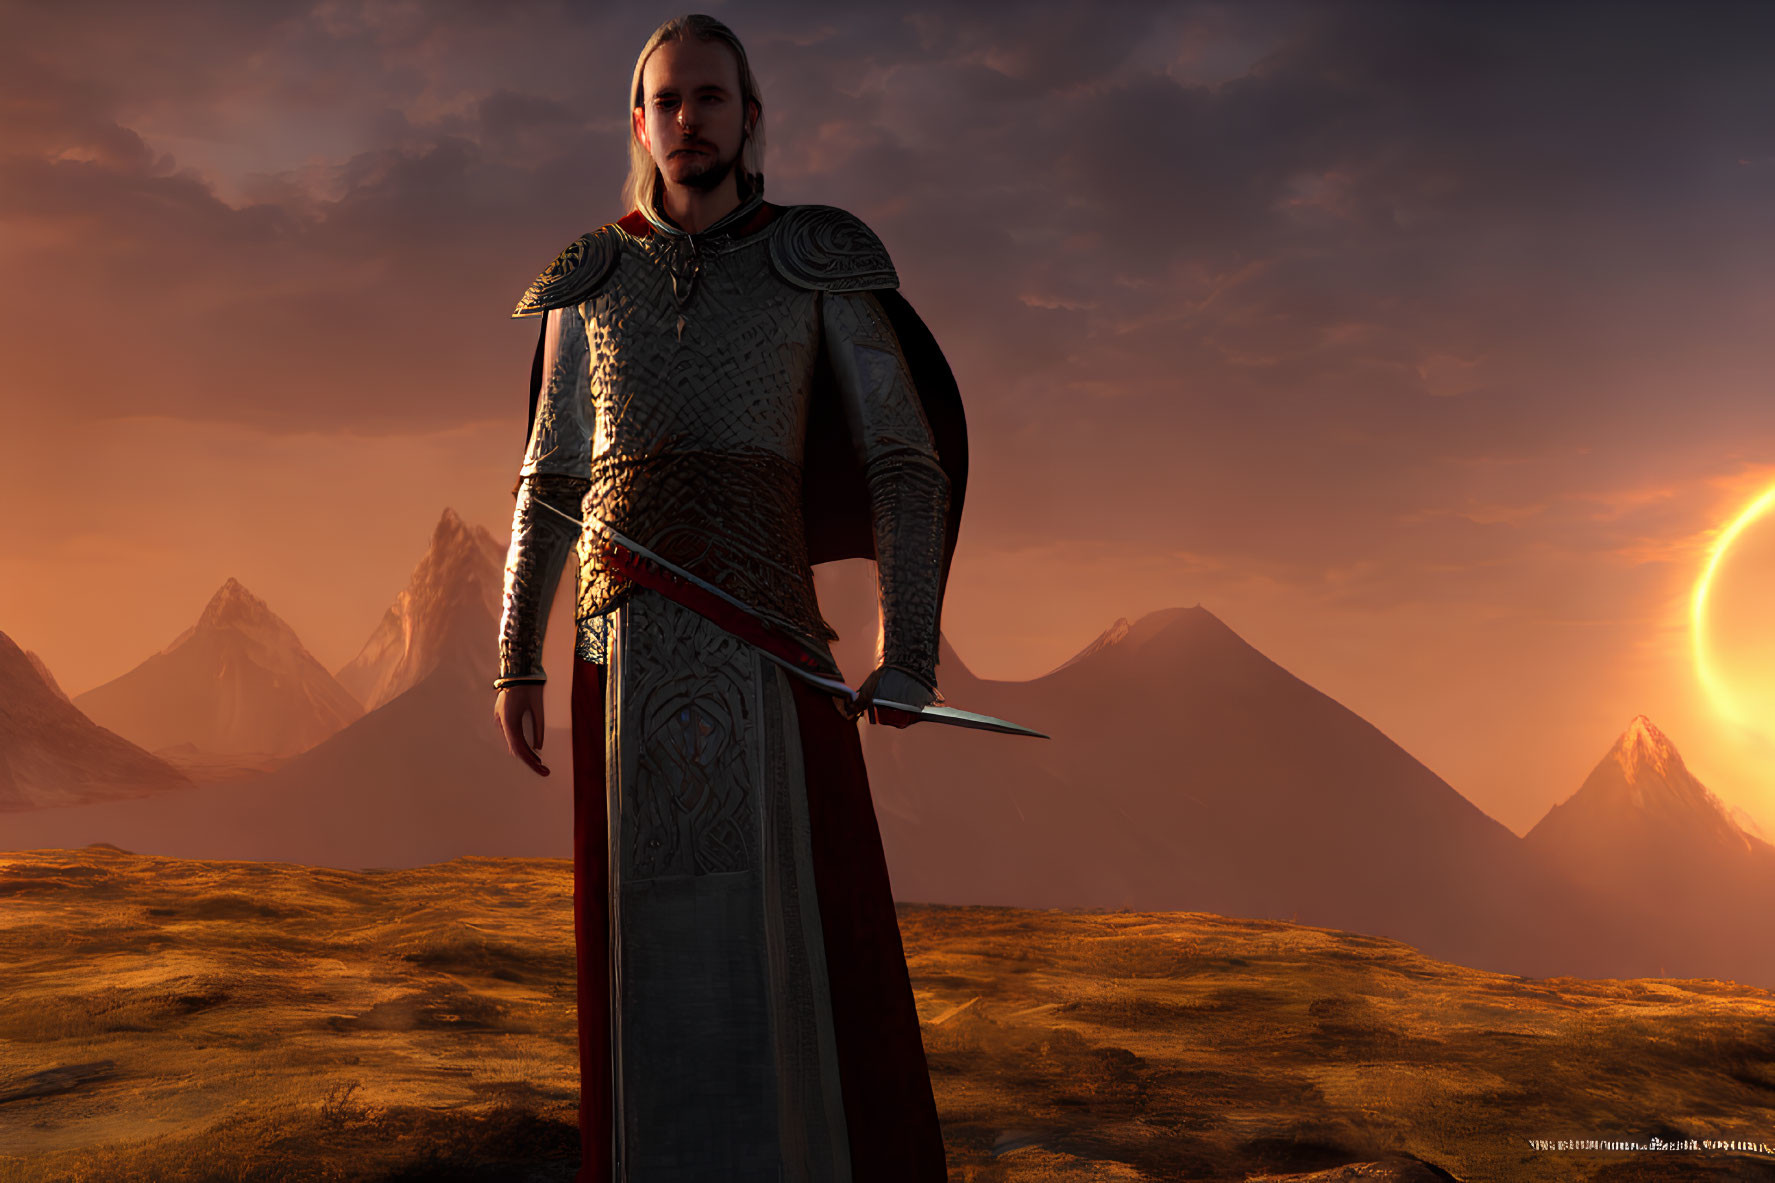 Medieval knight in armor with sword in mountain landscape at sunset